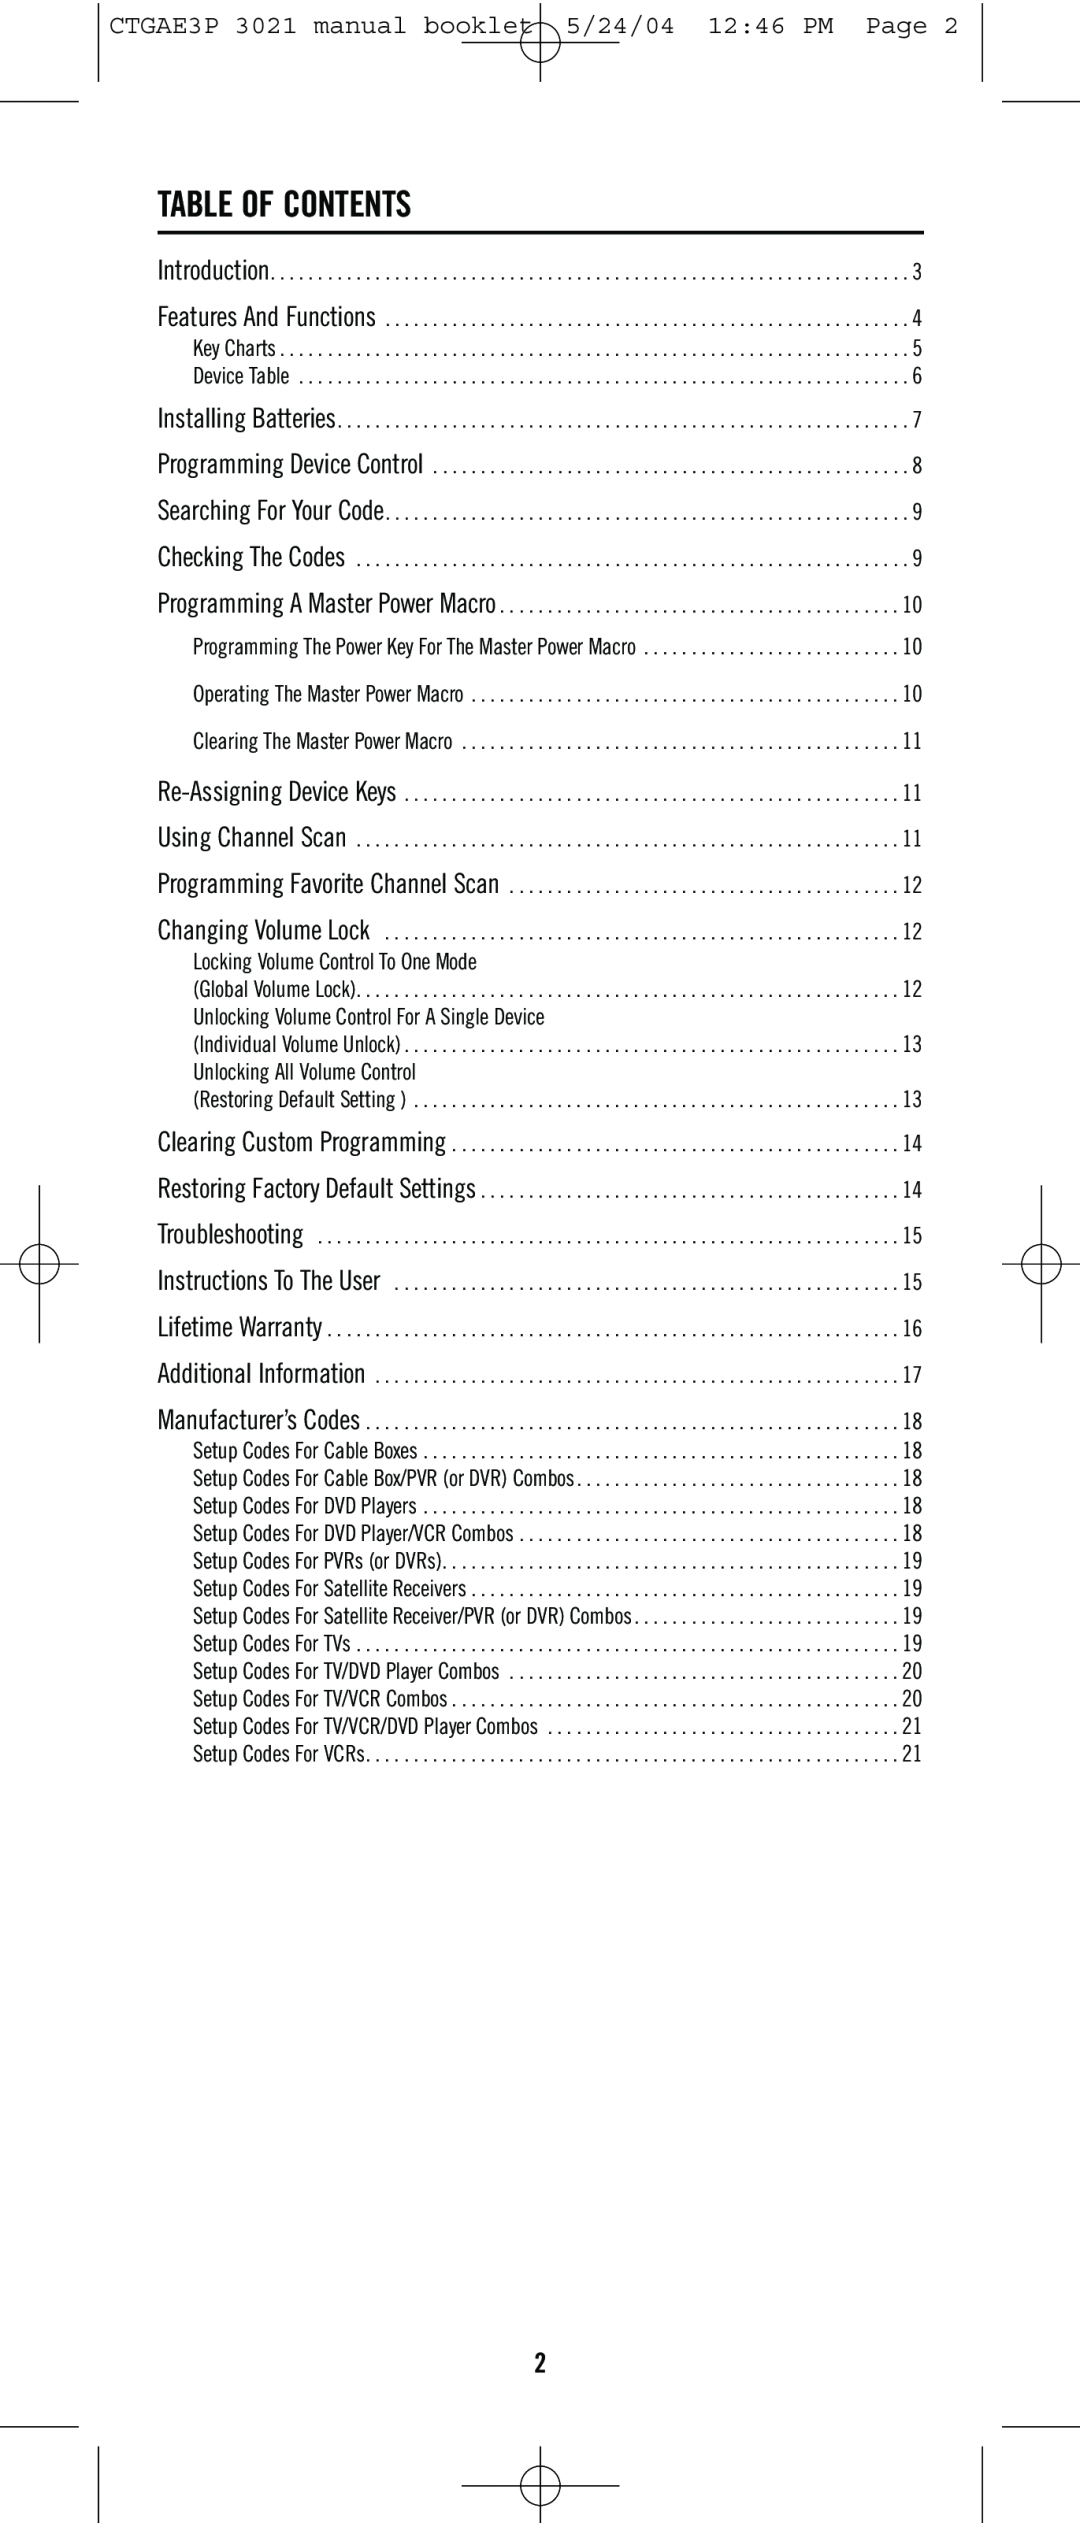 Universal Electronics URC-3021 Table Of Contents, CTGAE3P 3021 manual booklet 5/24/04 1246 PM Page 